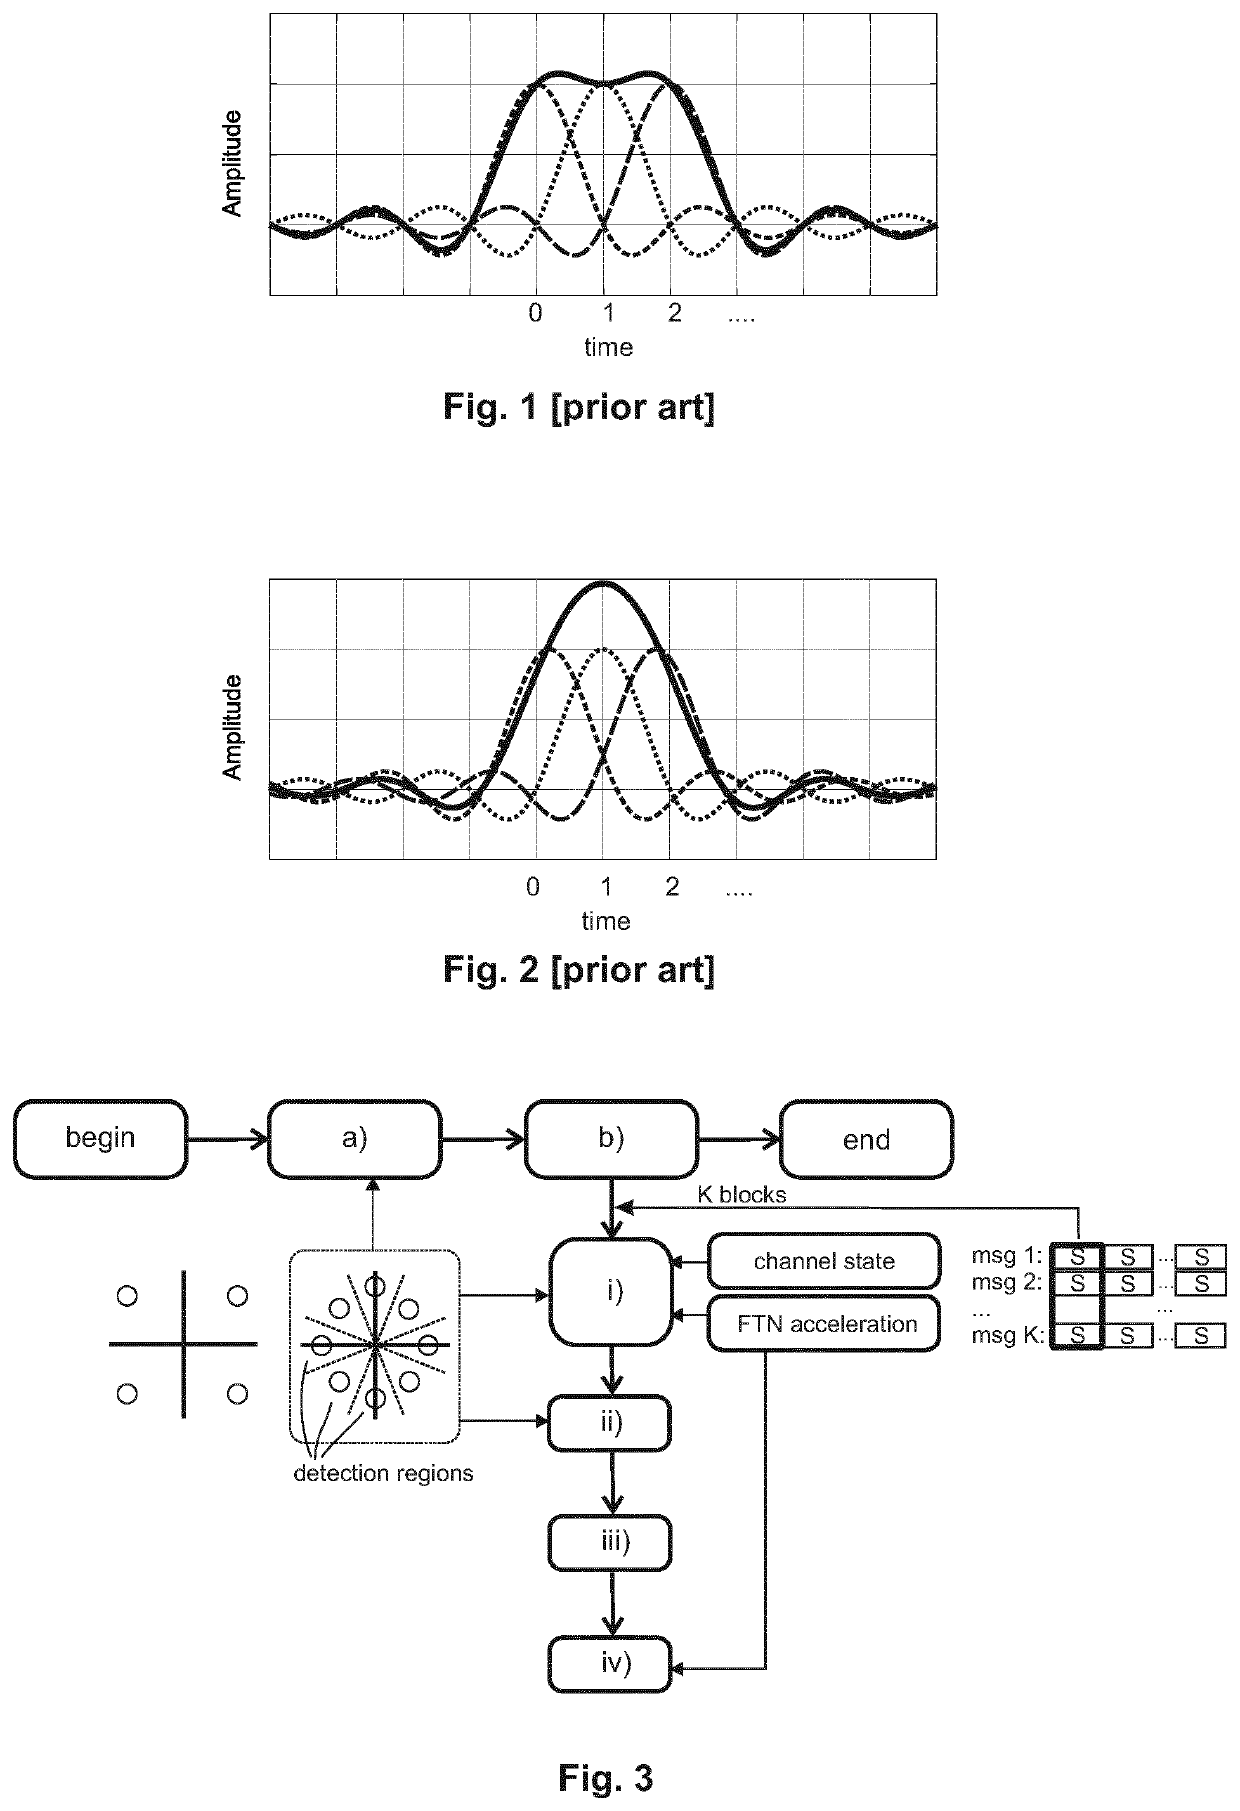 Spatio-temporal precoding for faster-than-Nyquist signal transmissions